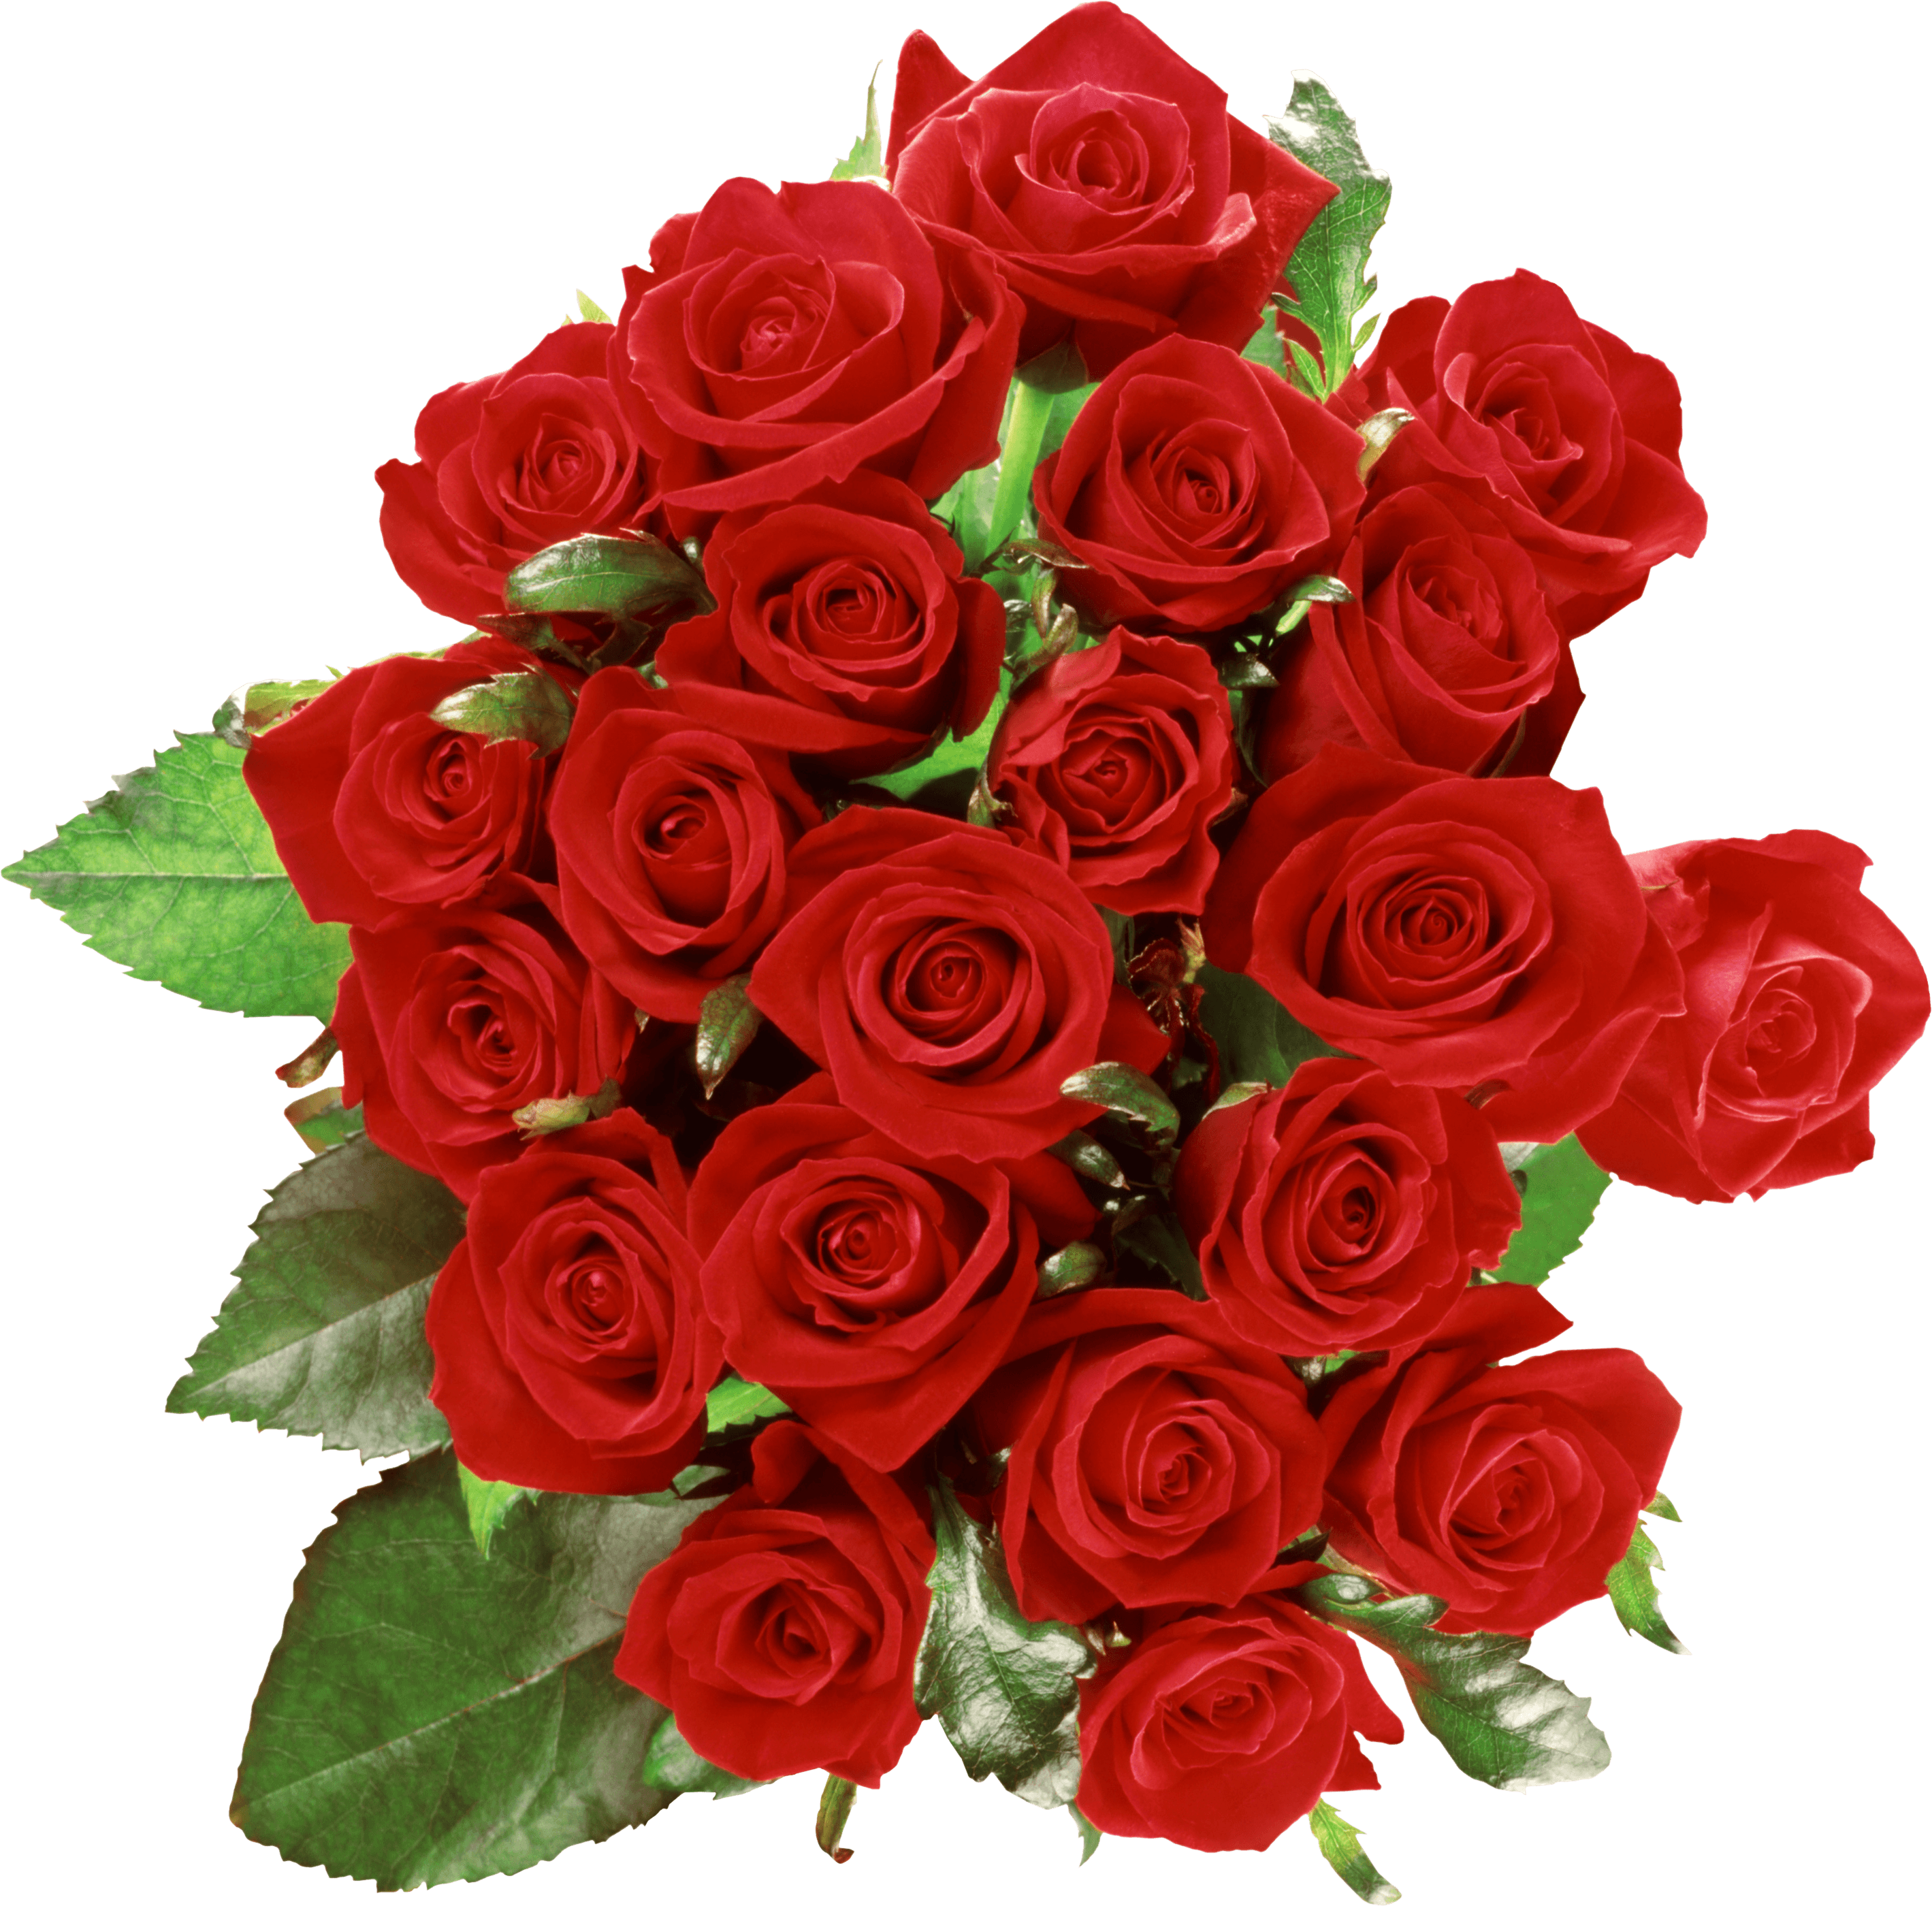 3-bouquet-of-roses-png-image-picture-download.png.